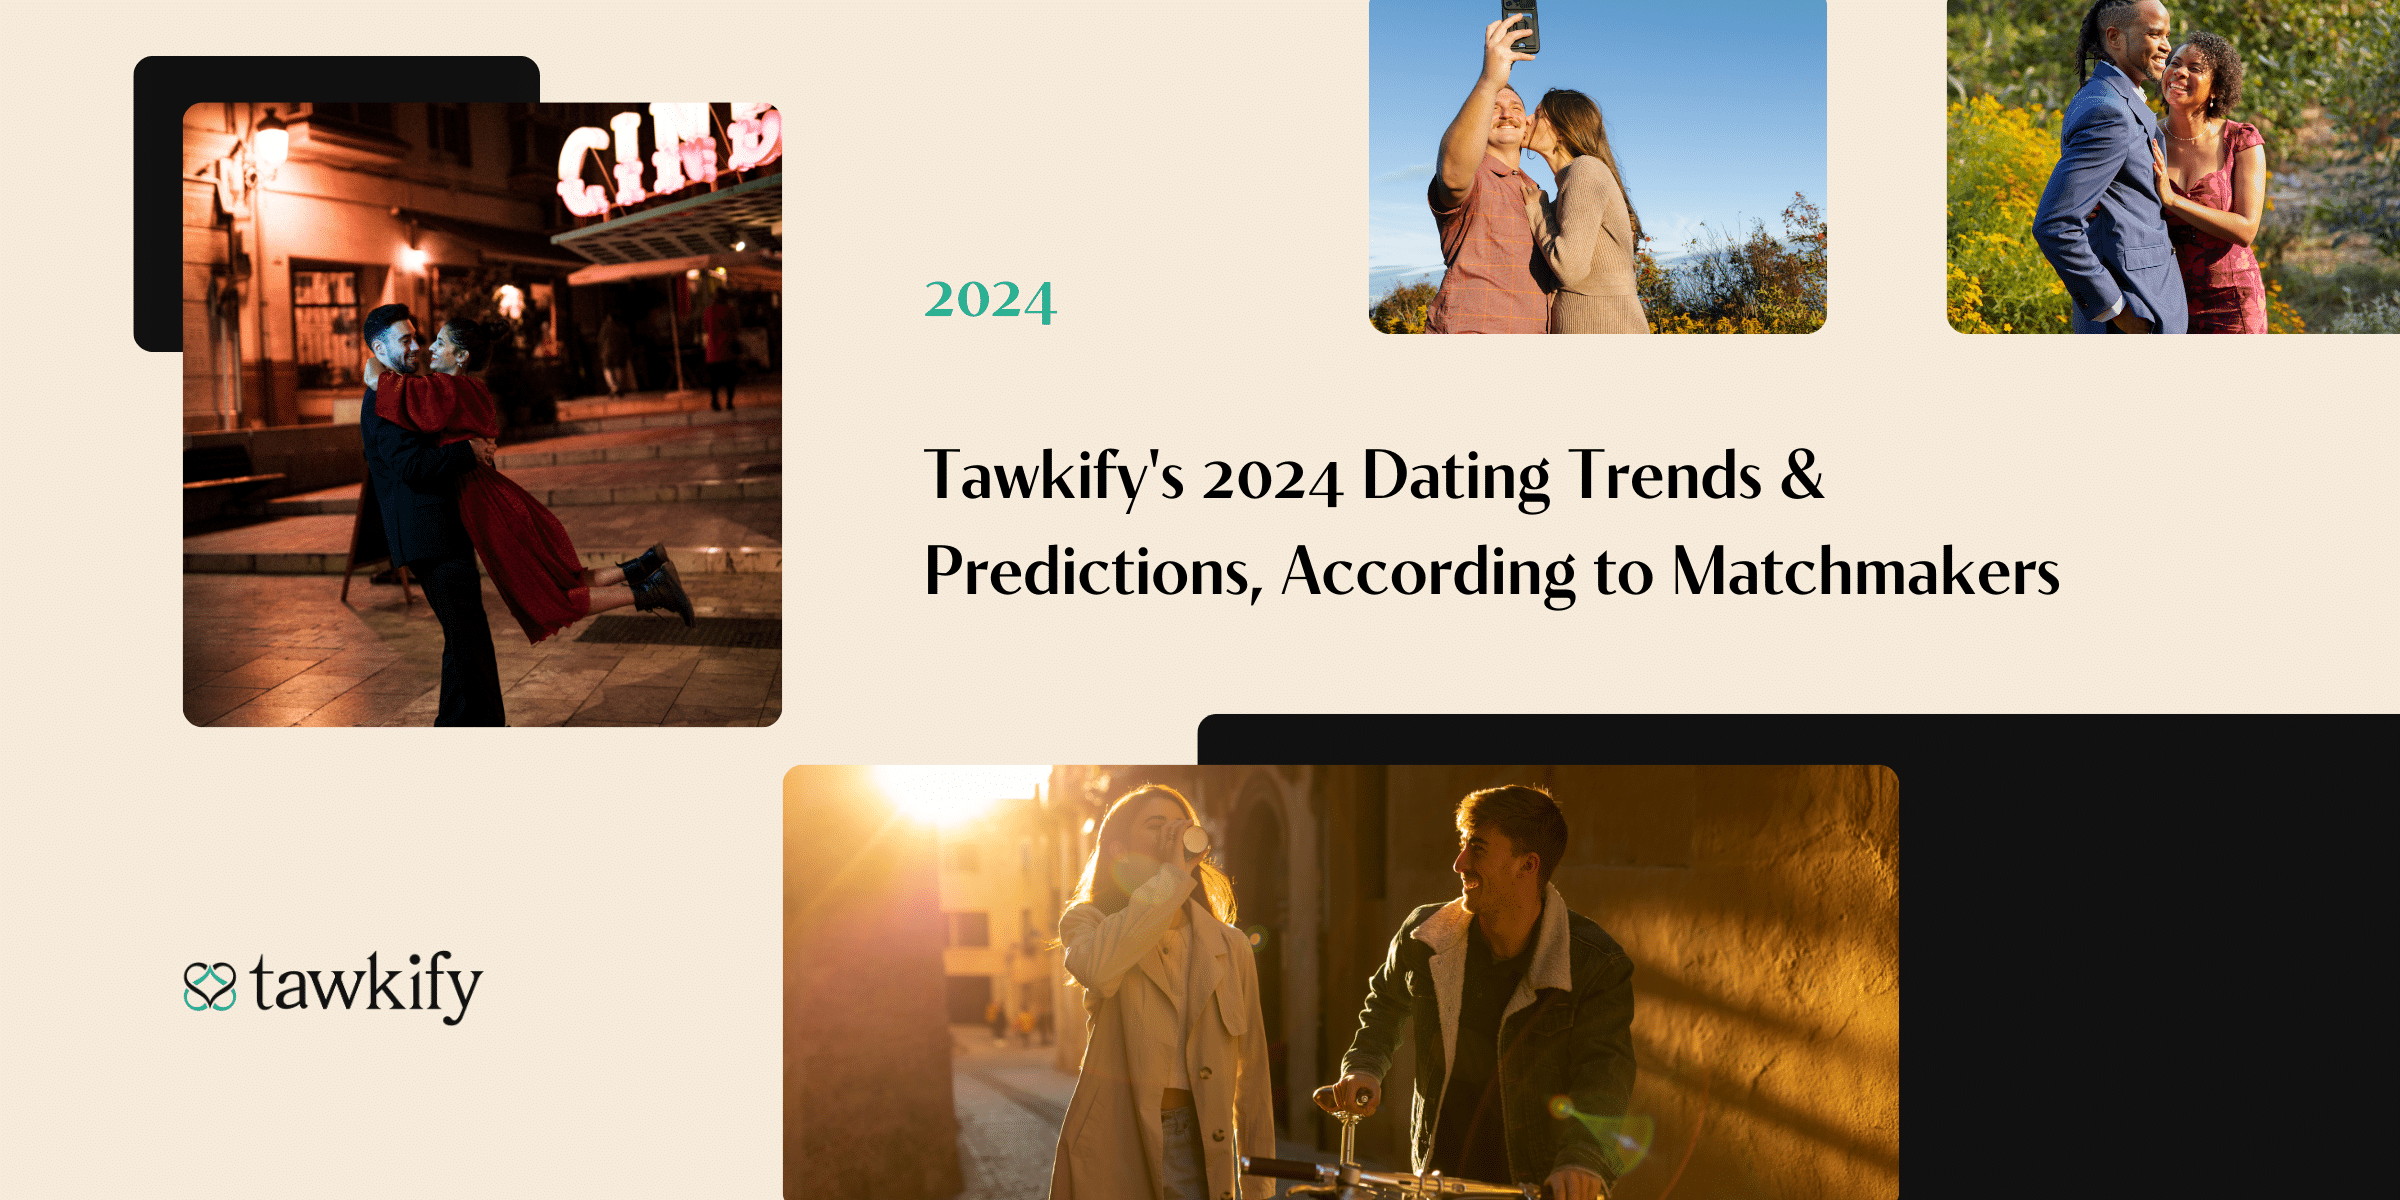 Tawkify Matchmakers share their dating trends and predictions for 2024. Start your new year with fresh insights to date intentionally.